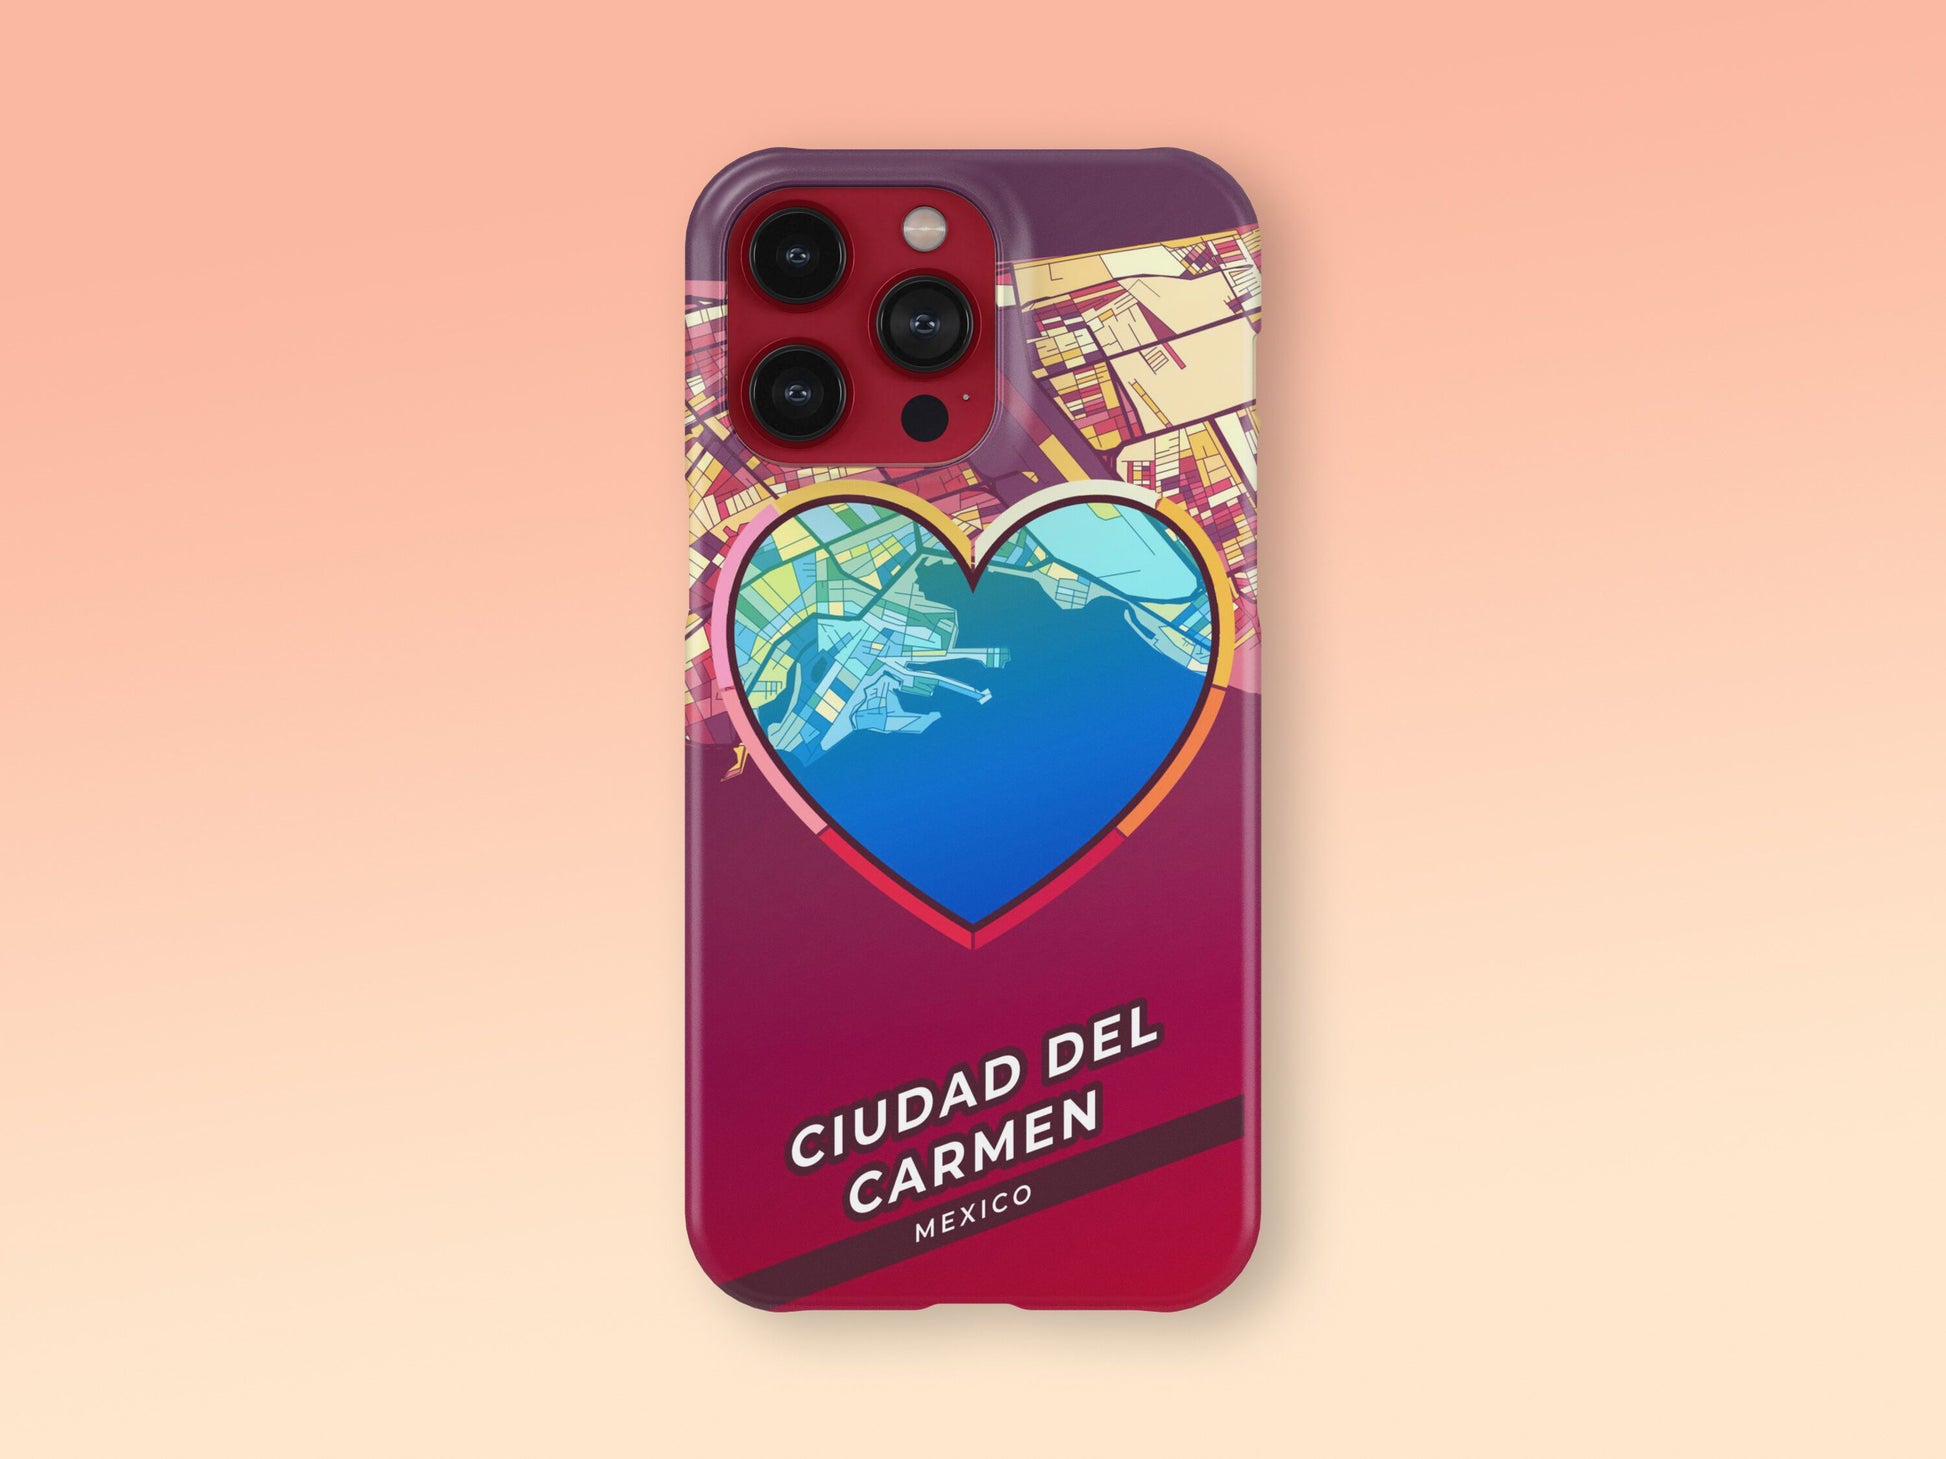 Ciudad Del Carmen Mexico slim phone case with colorful icon. Birthday, wedding or housewarming gift. Couple match cases. 2